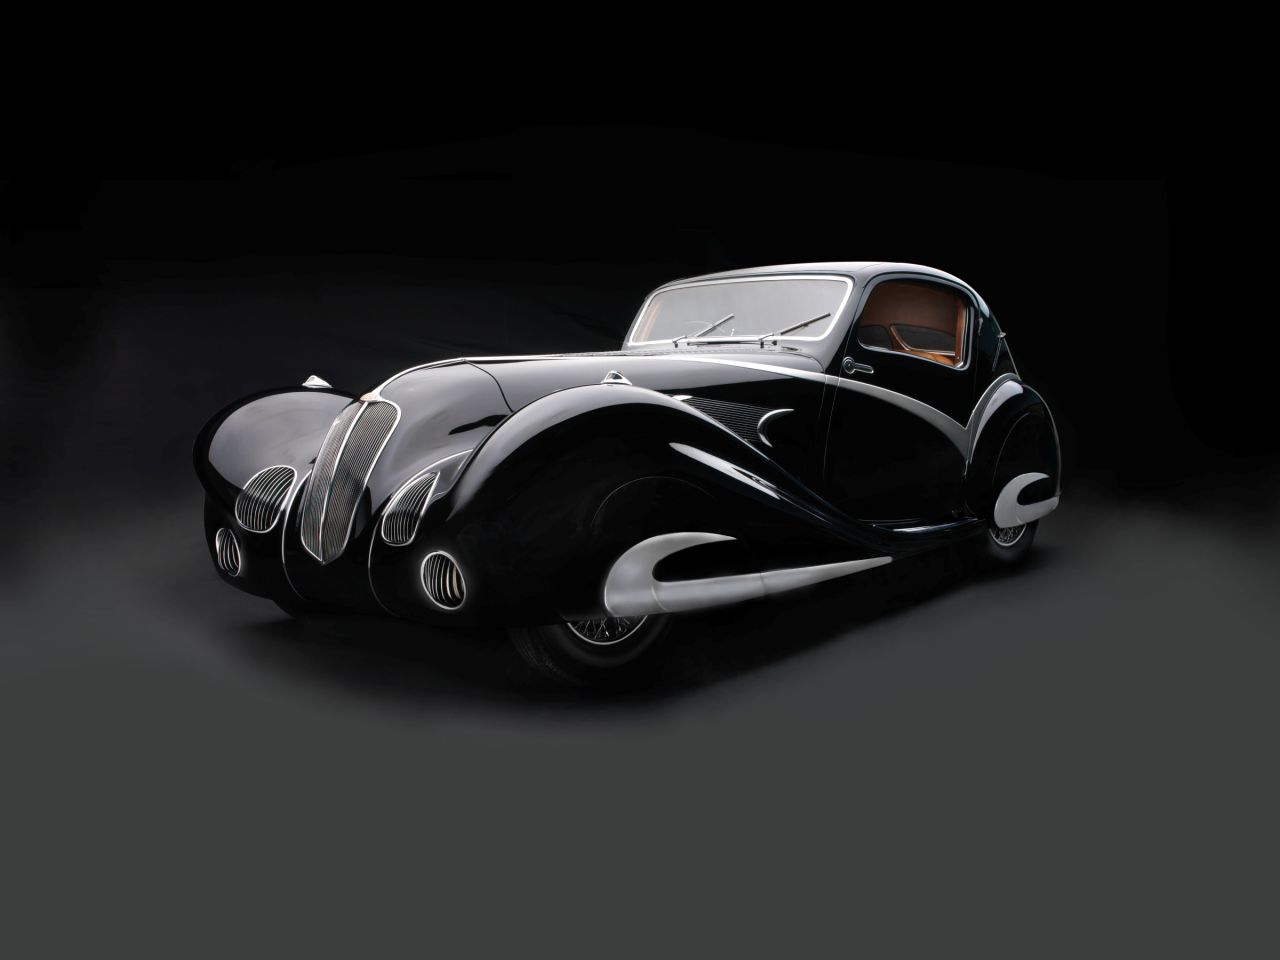 The Museum of Fine Arts in Houston will host an exhibition of automobiles that are so beautifully sculpted, they can best described as works of art.